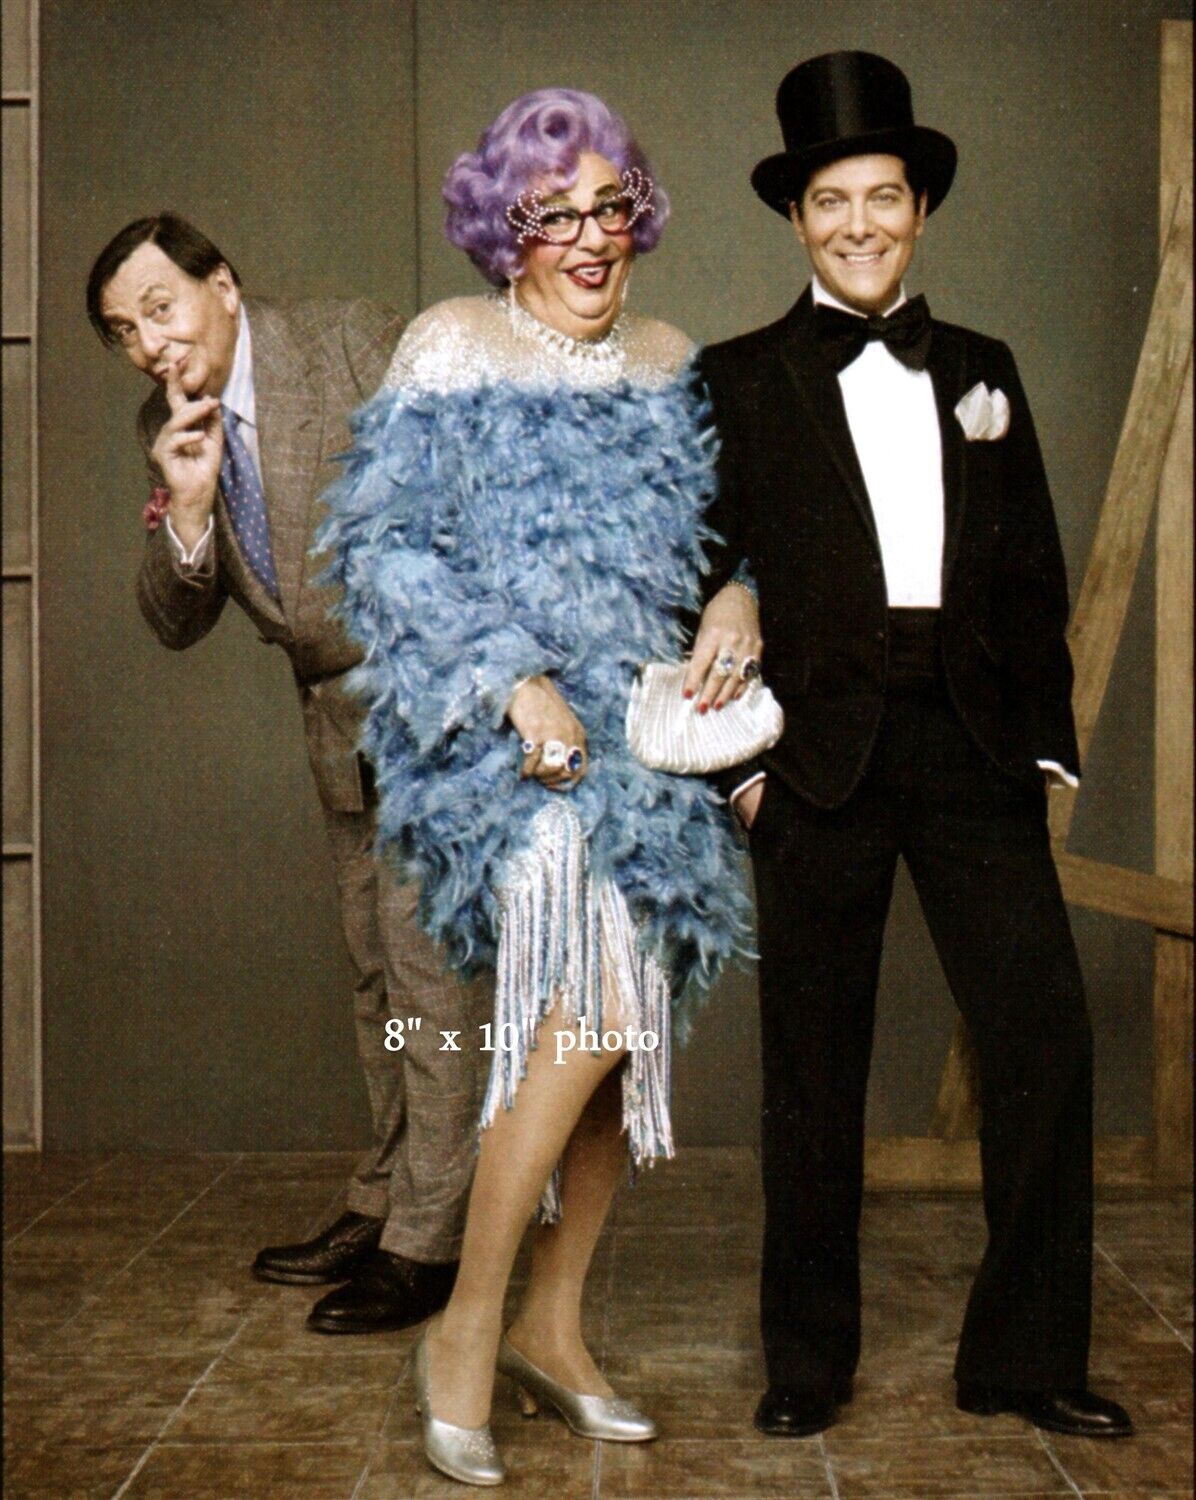 DAME EDNA EVERAGE BARRY HUMPHRIES and MICHAEL FEINSTEIN Celebrity Photo (151)